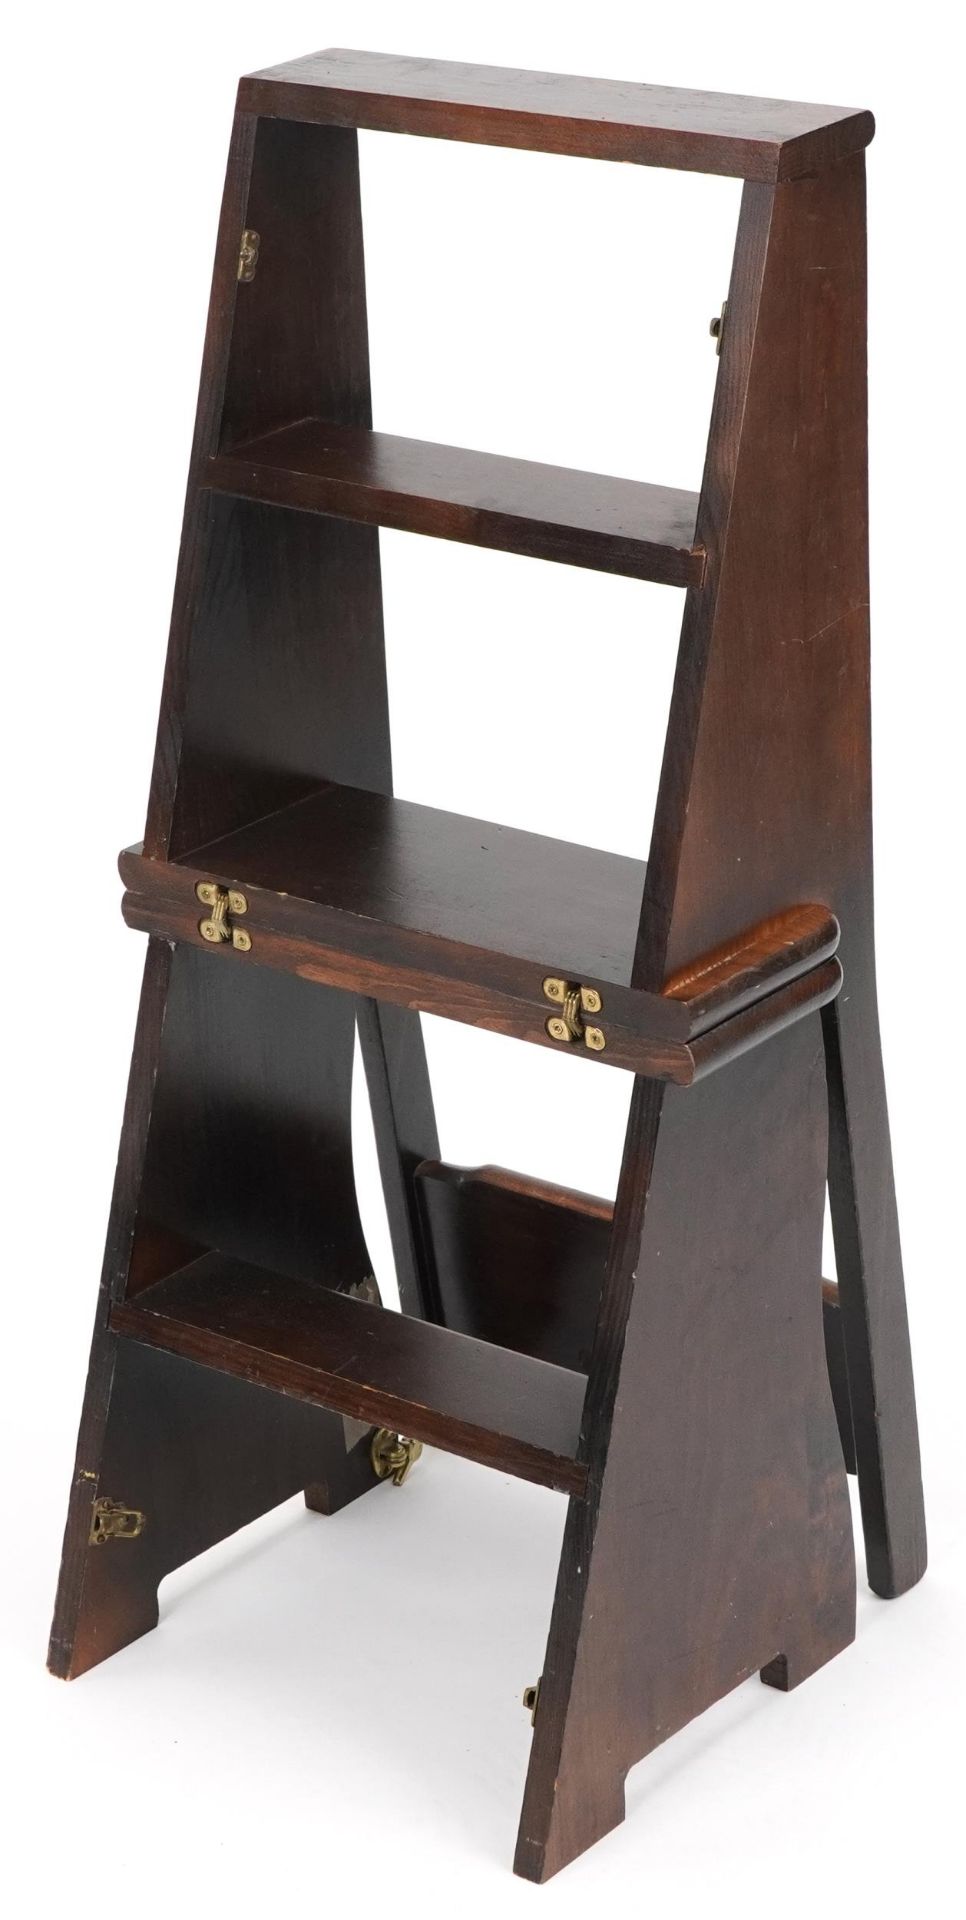 Set of stained pine metamorphic library steps/chair, 82cm high as a chair, 92cm high as a ladder : - Image 5 of 5